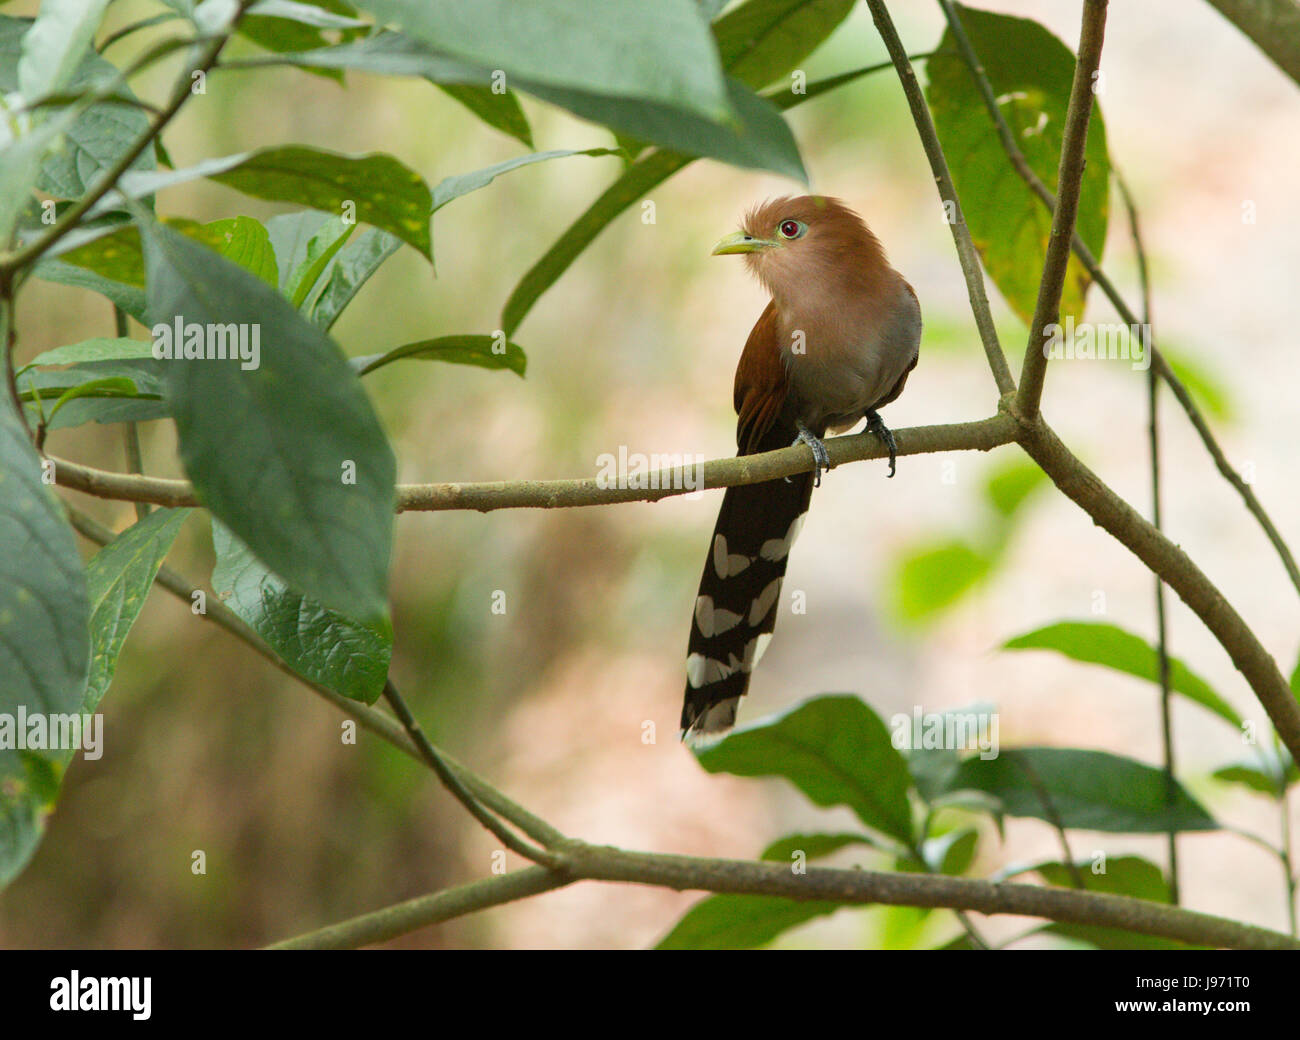 Squirrel Cuckoo perched on a branch Stock Photo